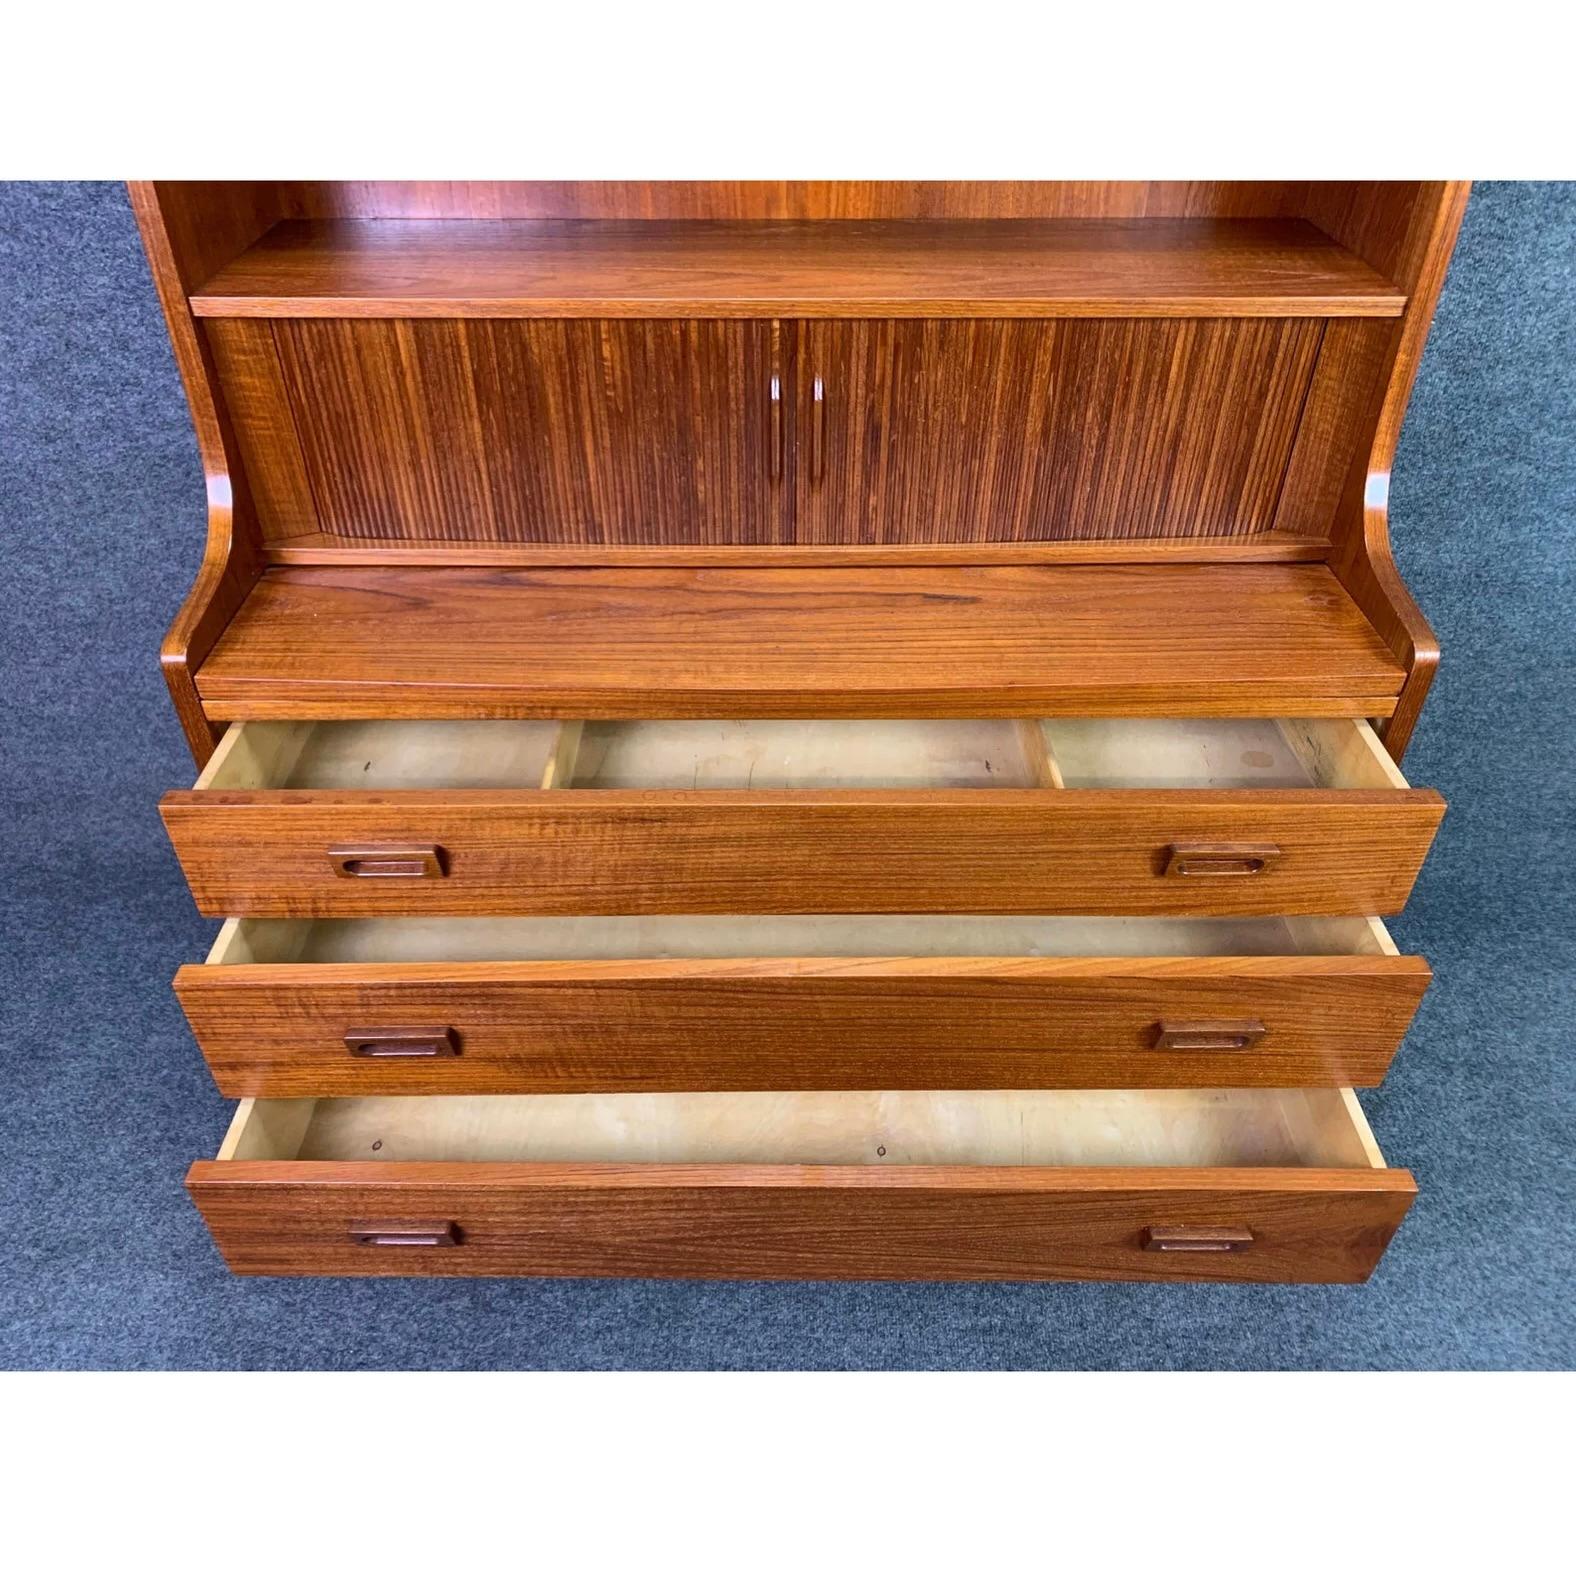 Vintage Danish Mid Century Modern Teak Secretary Bookcase by Johannes Sorth In Good Condition For Sale In San Marcos, CA